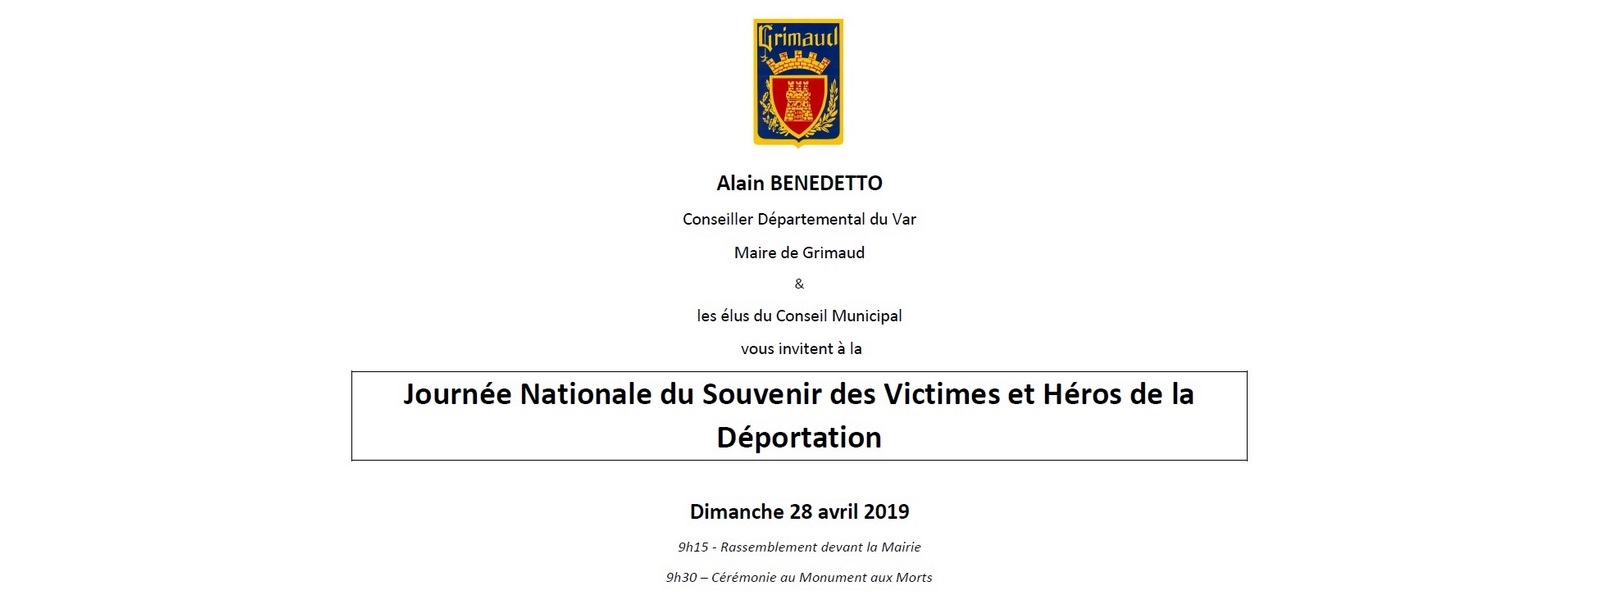 April 28, 2019: National Day of Remembrance of the Victims and Heroes of the Deportation